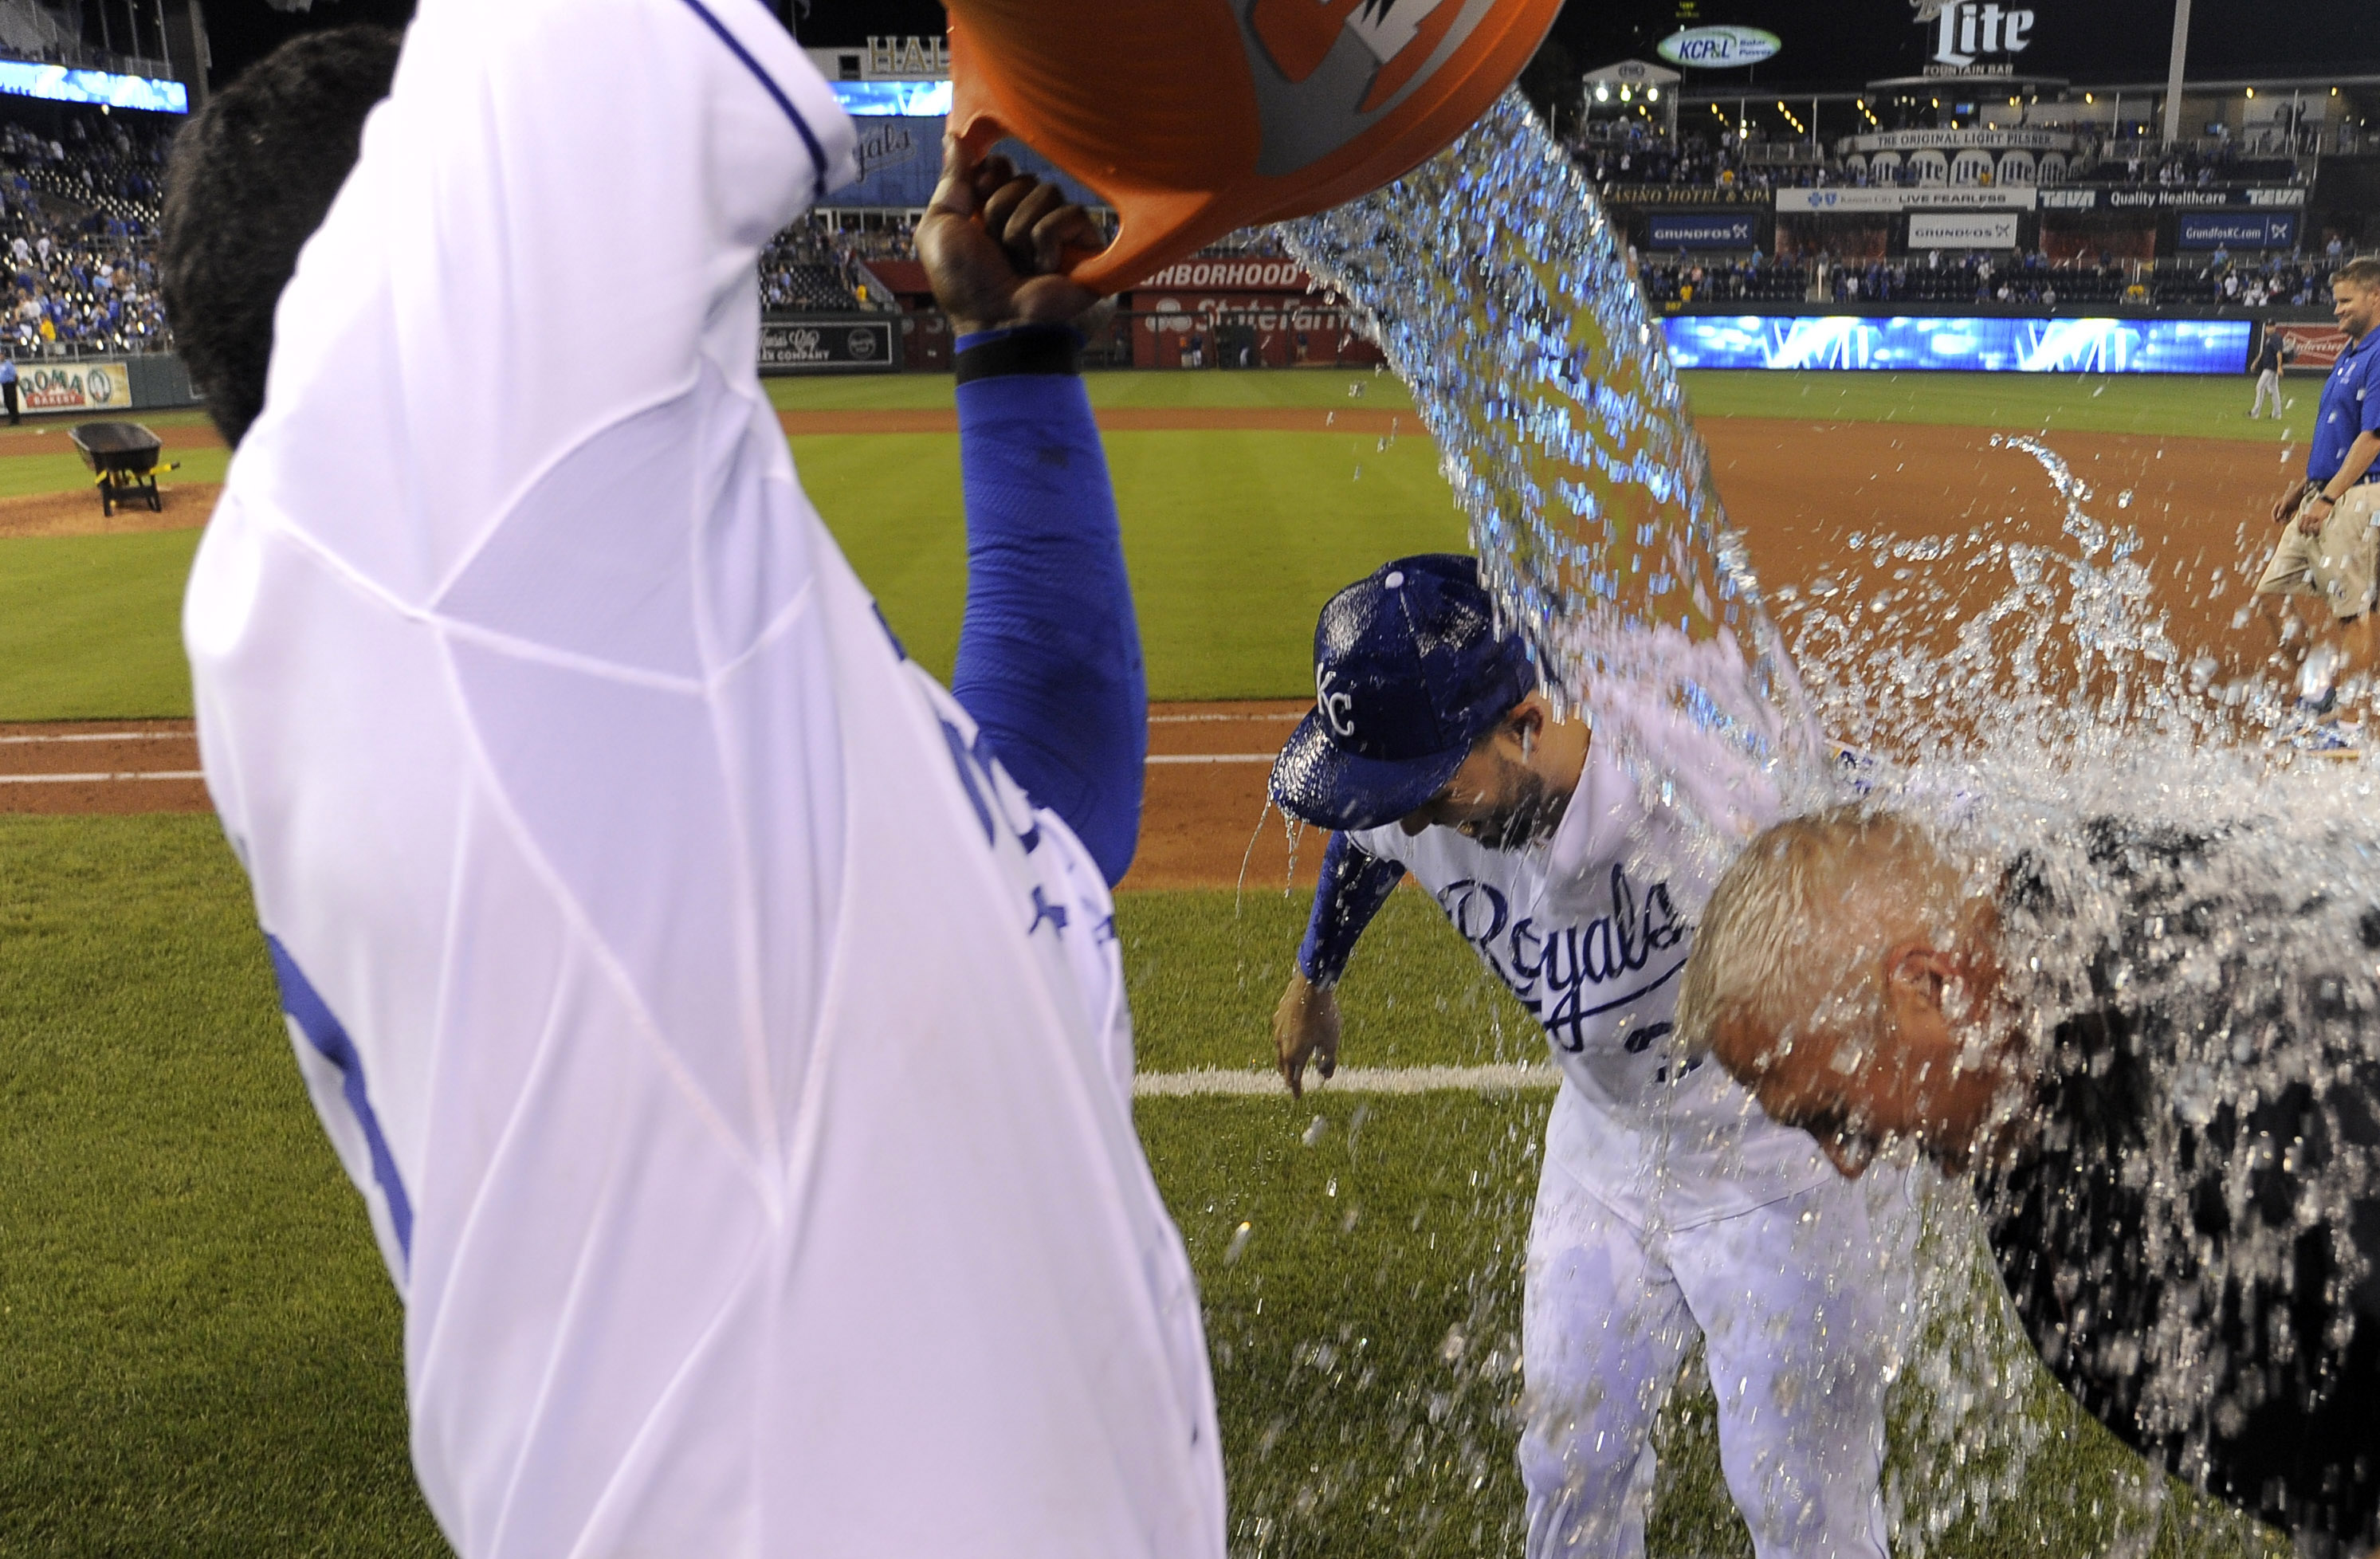 Even the postgame interview guy gets a gatorade shower.